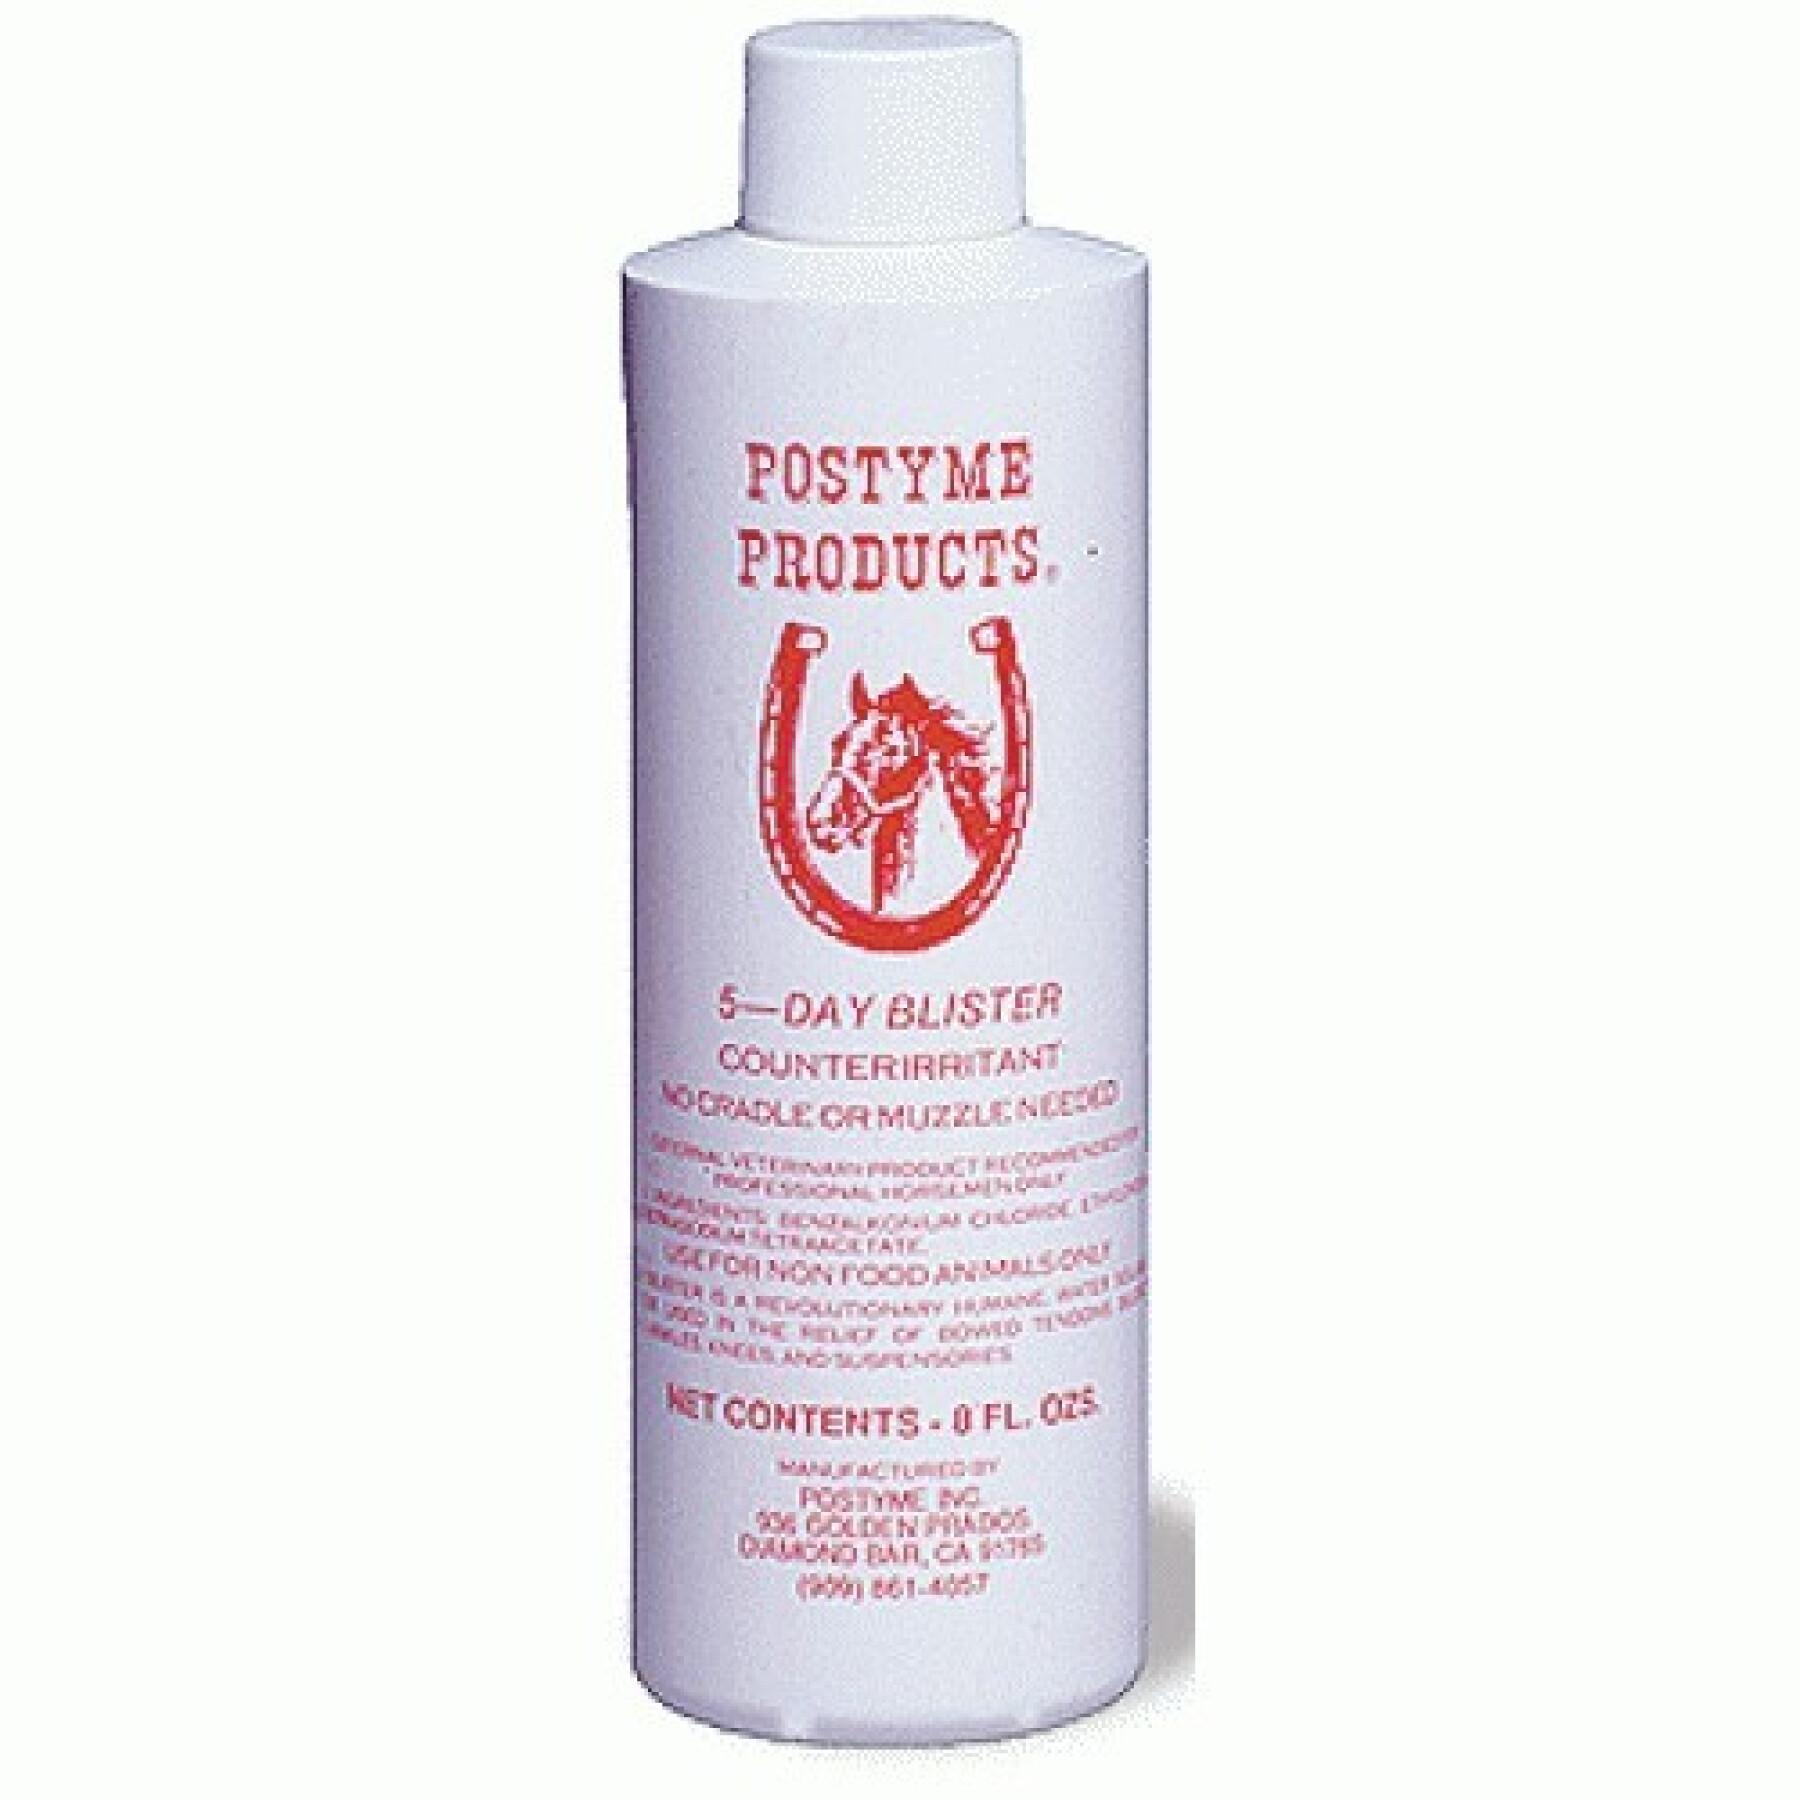 Care for the horse's limbs Postyme Products Five Day Blister 236 ml